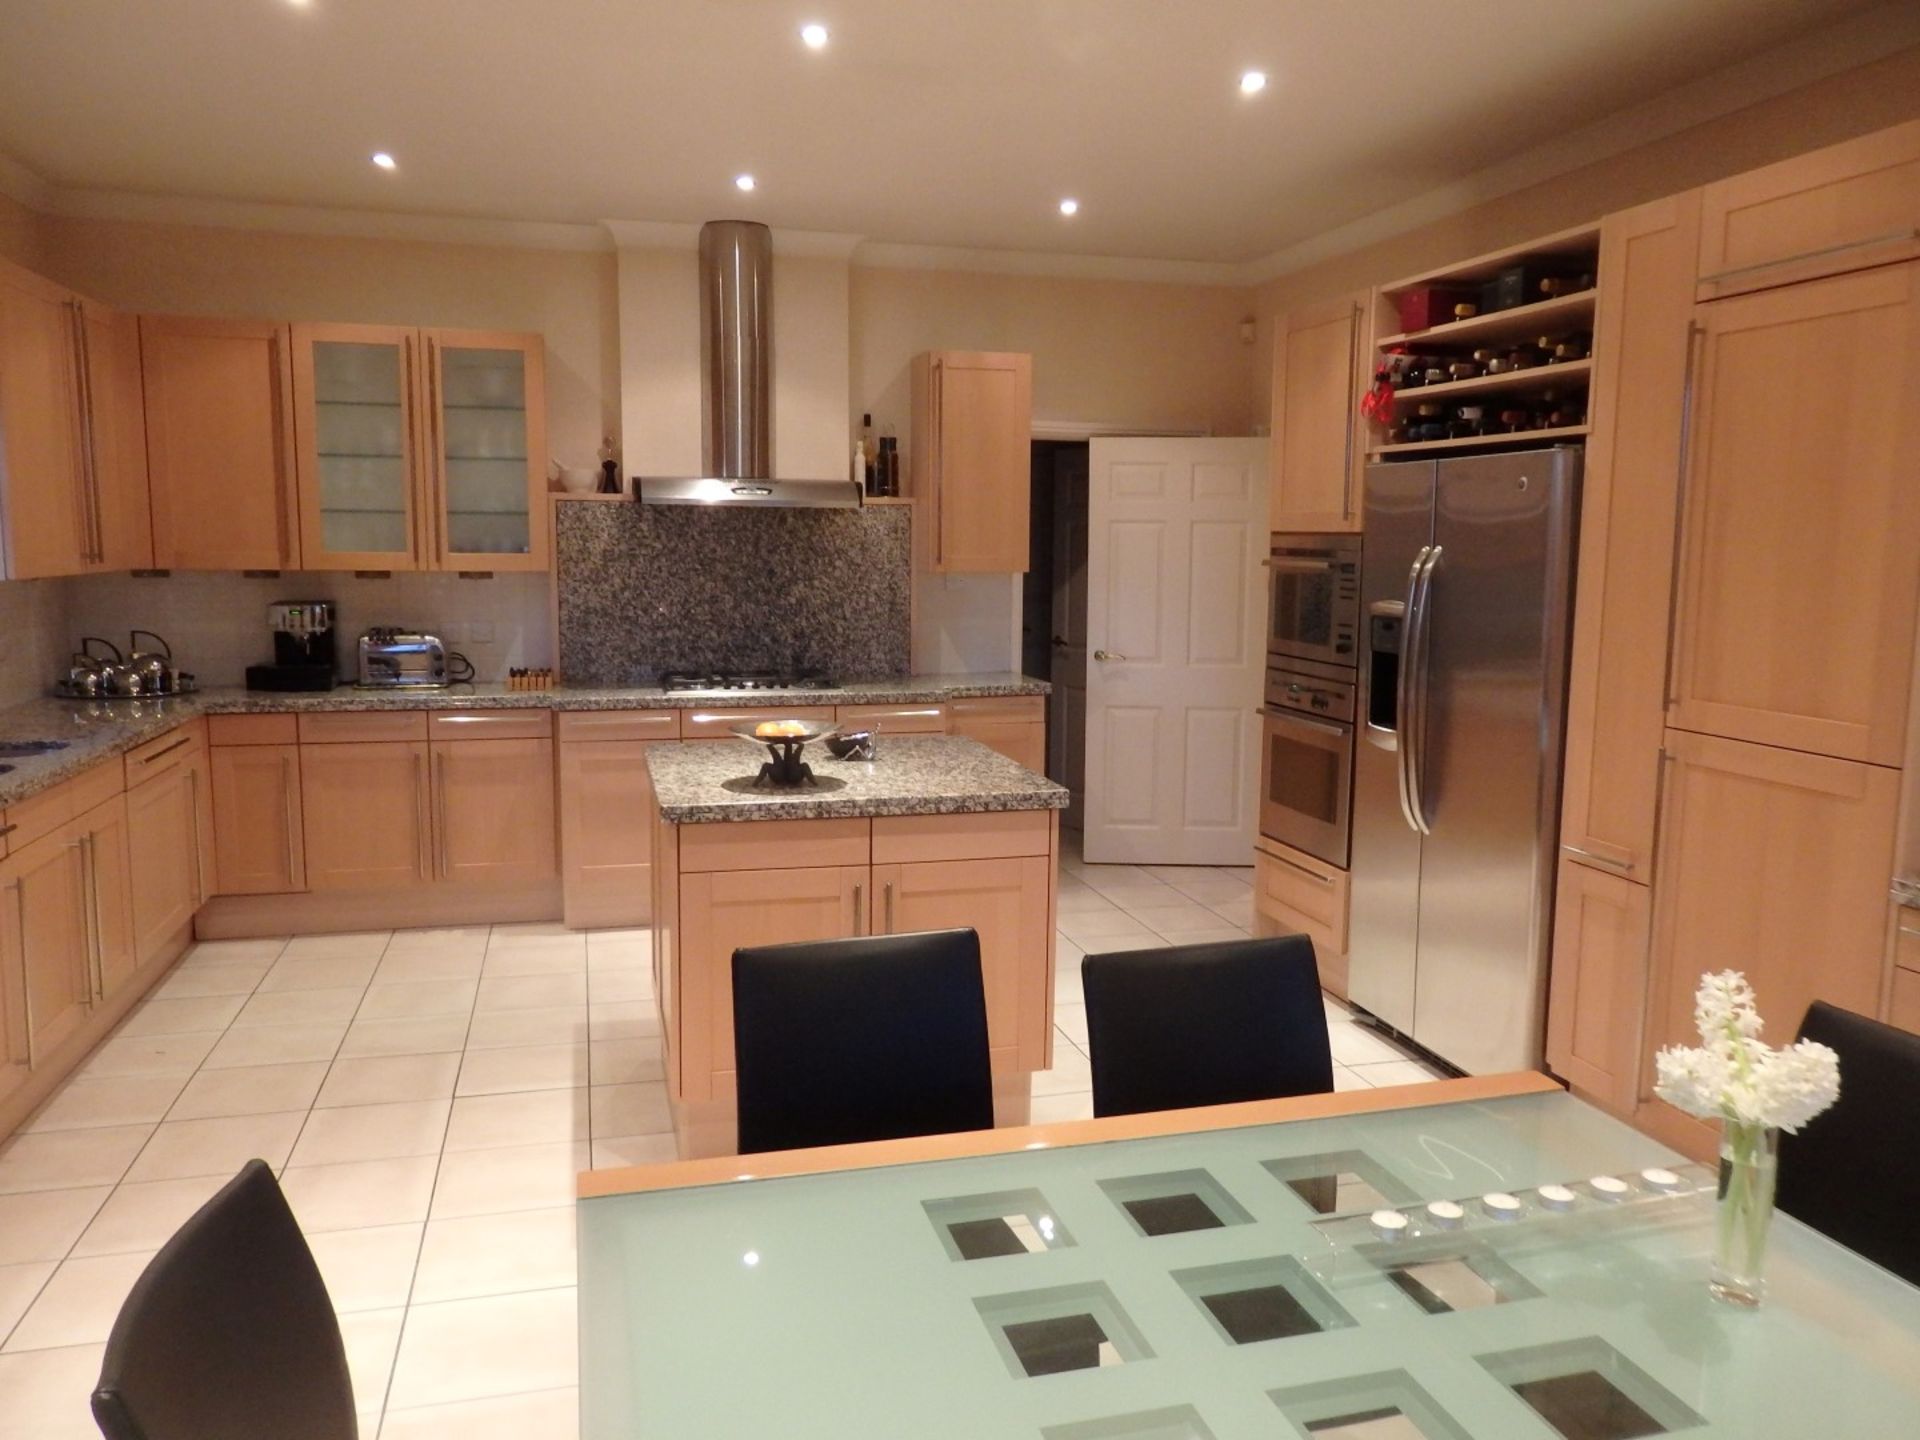 1 x Siematic Fitted Kitchen With Beech Shaker Style Doors, Granite Worktops, Central Island and - Image 6 of 148